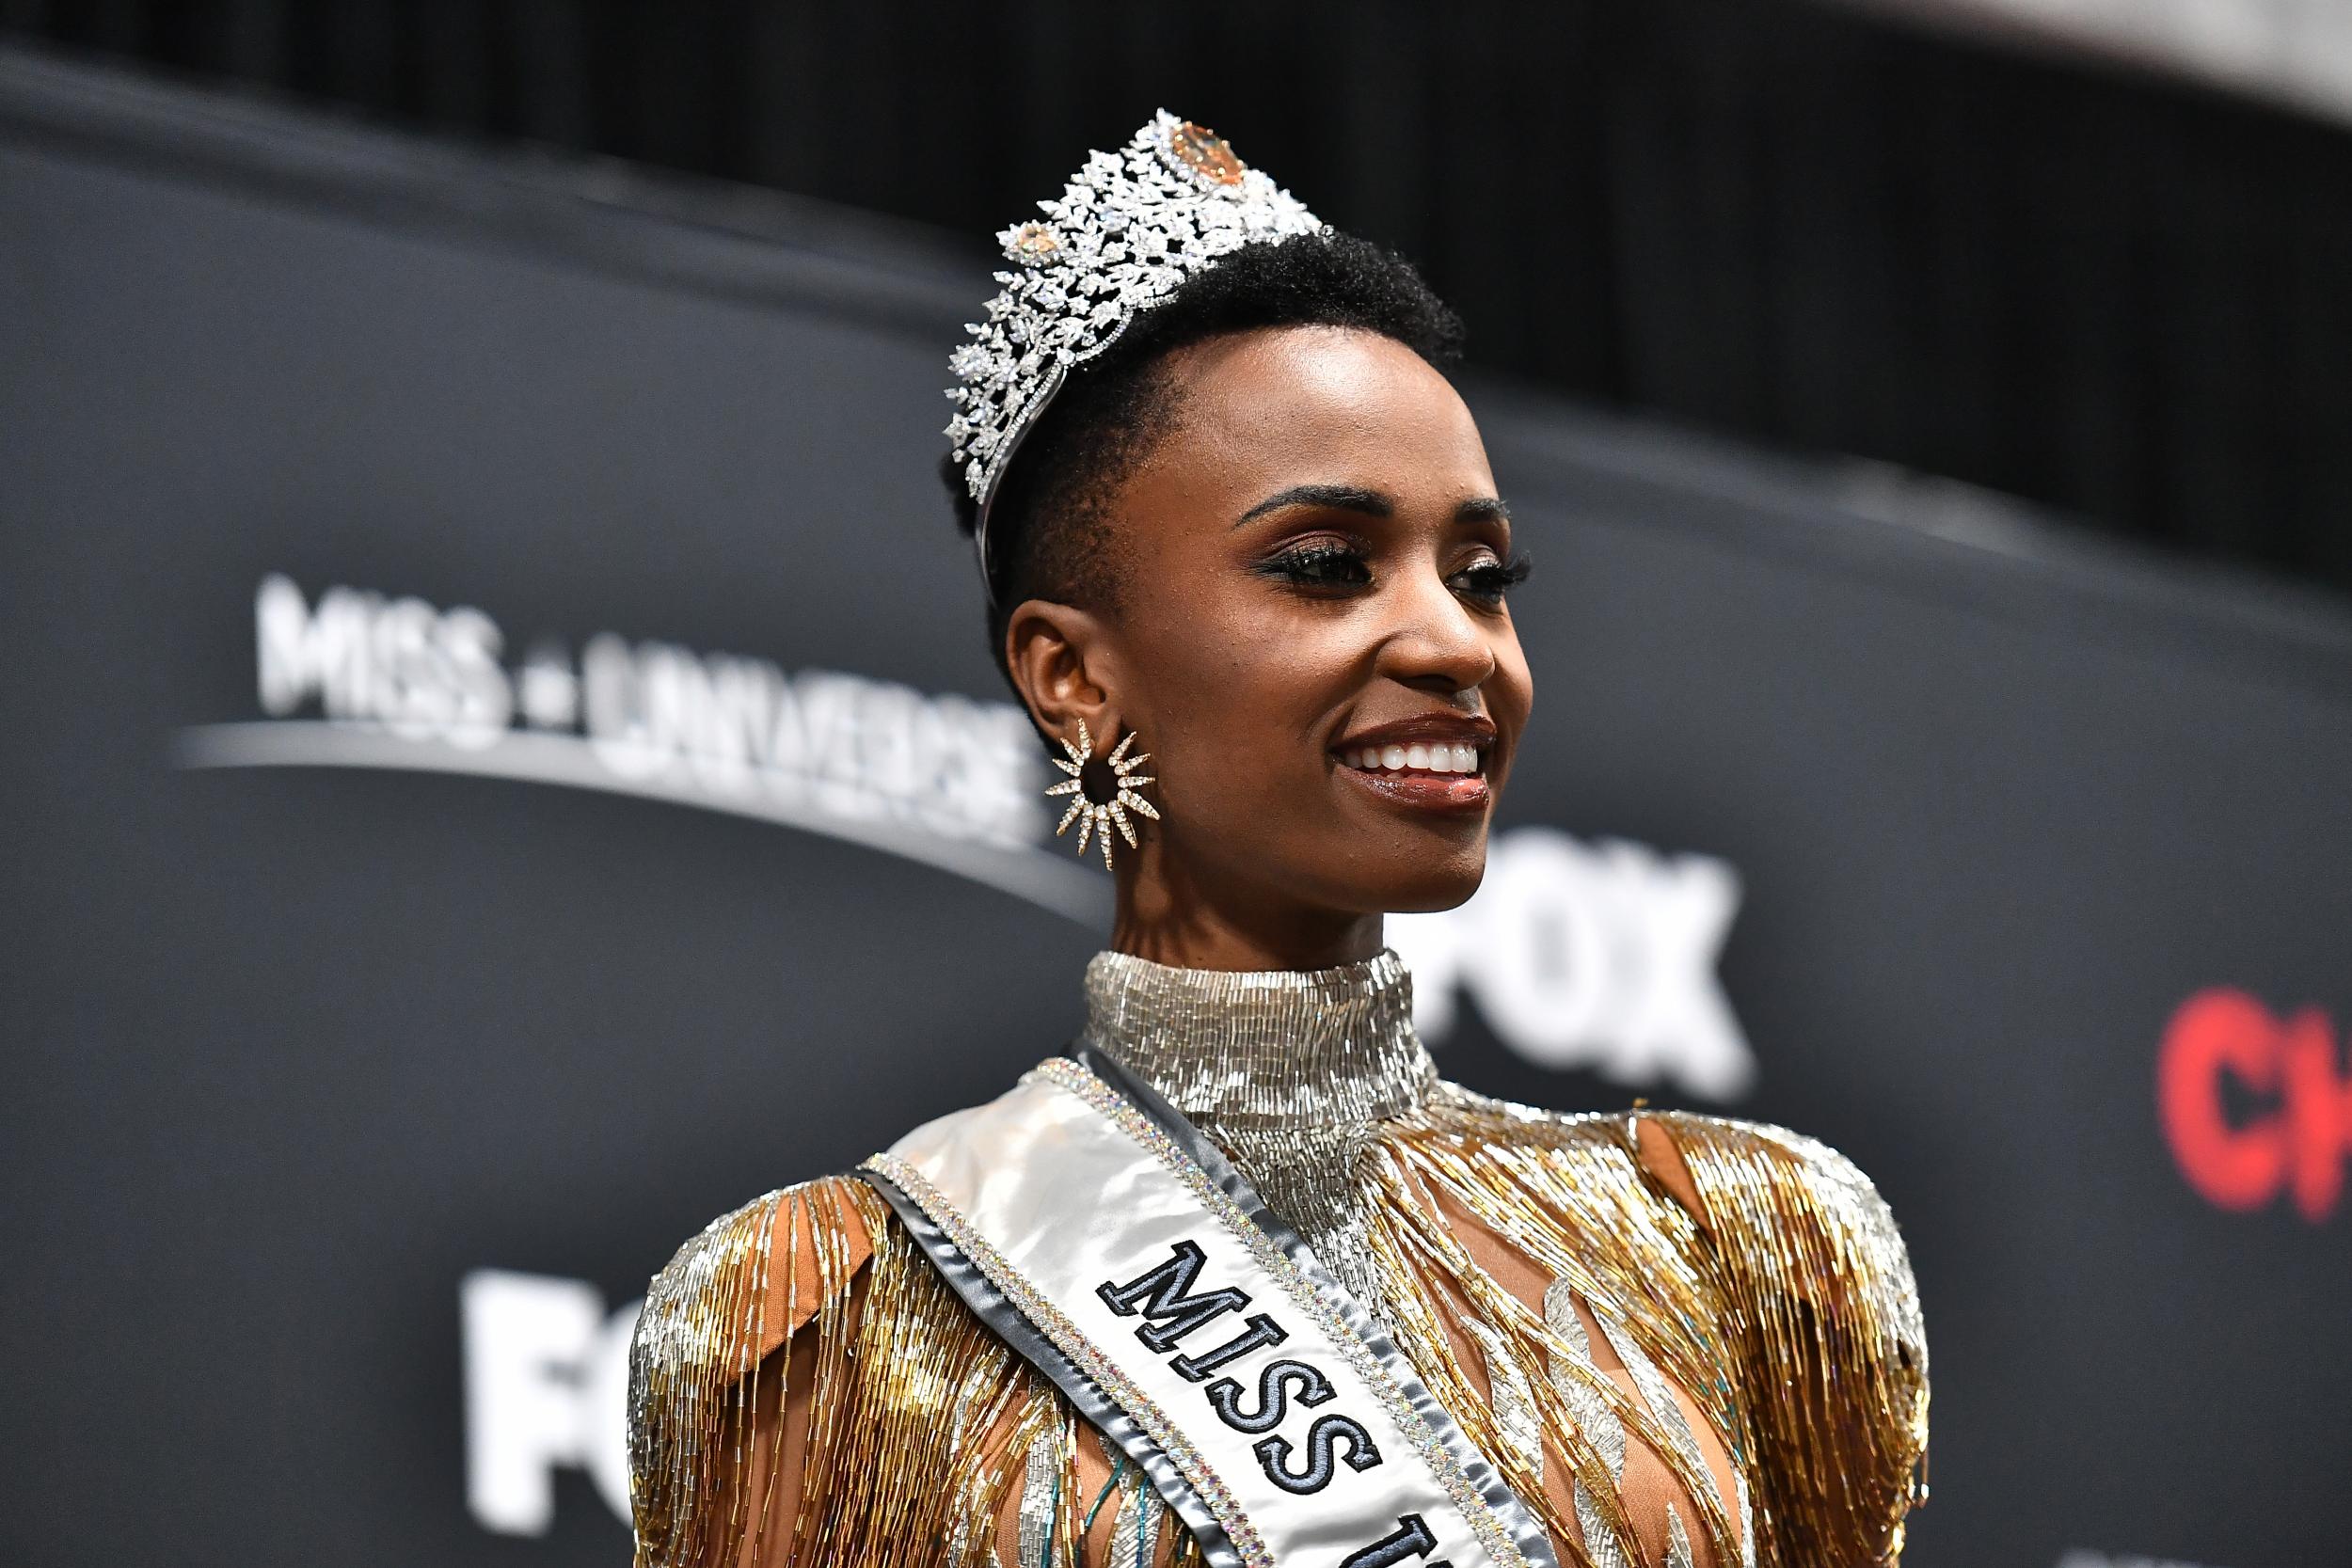 Miss Universe 2019 Zozibini Tunzi, of South Africa, appears at a press conference following the pageant